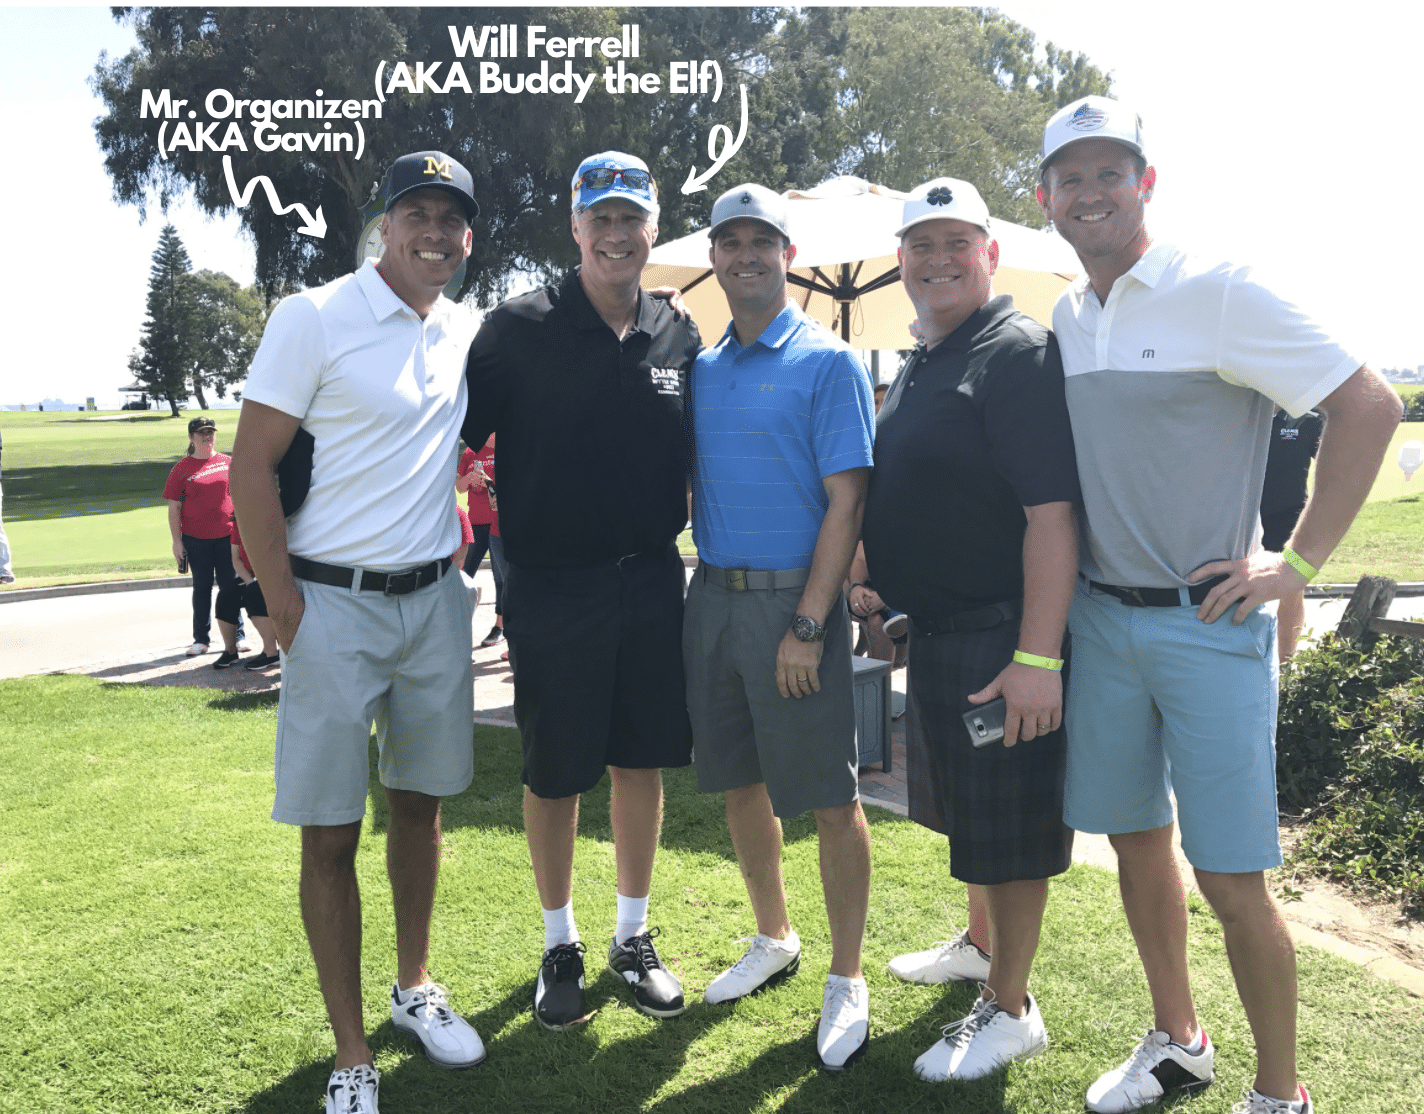 Group of men golfers with Will Ferrell